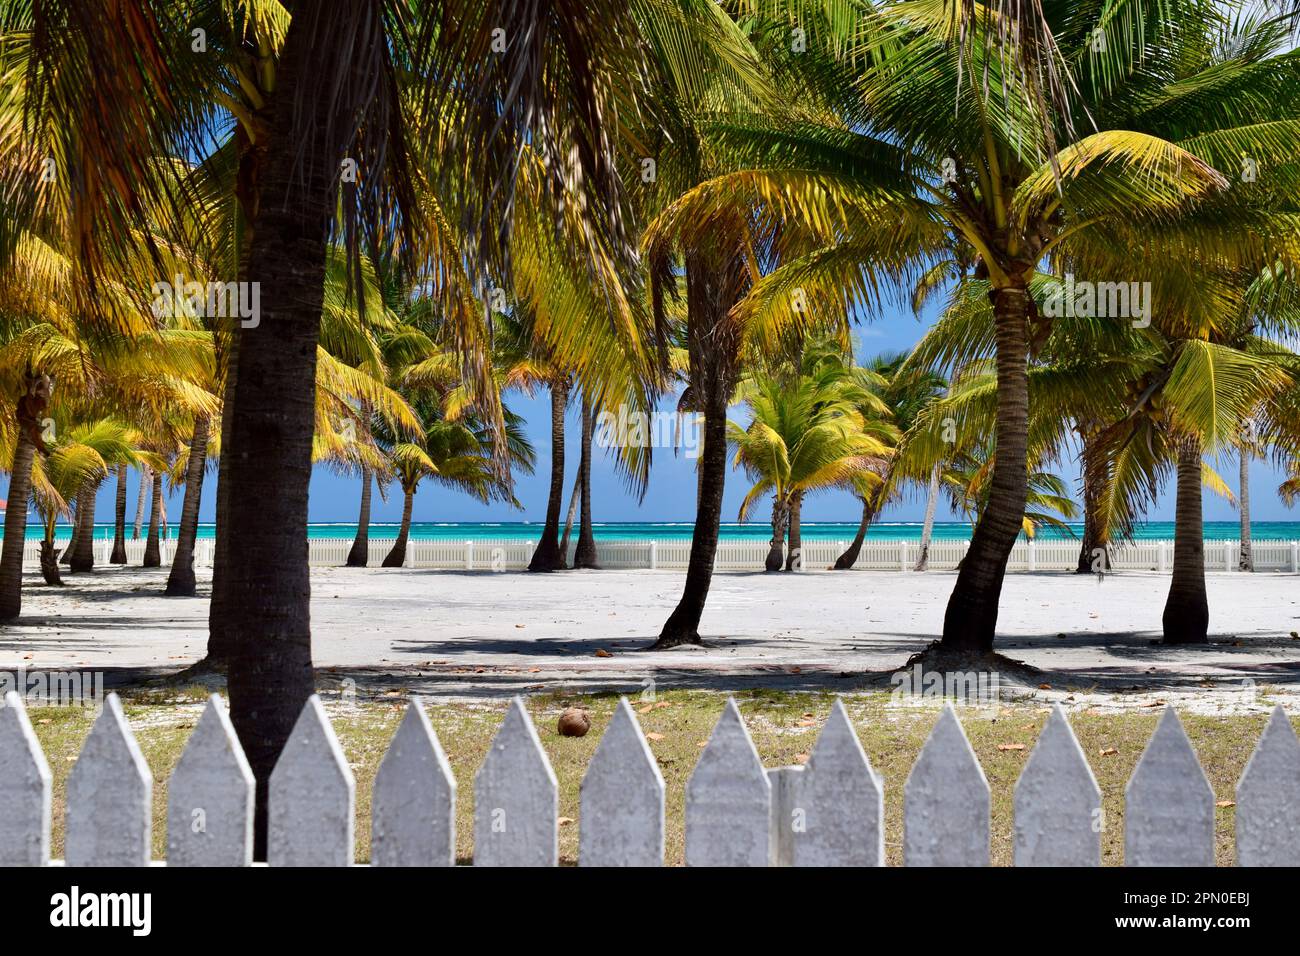 Palm trees on a beach, with the turquoise sea in the background, on a sunny day in San Pedro, Ambergris Caye, Belize, Caribbean/Central America. Stock Photo